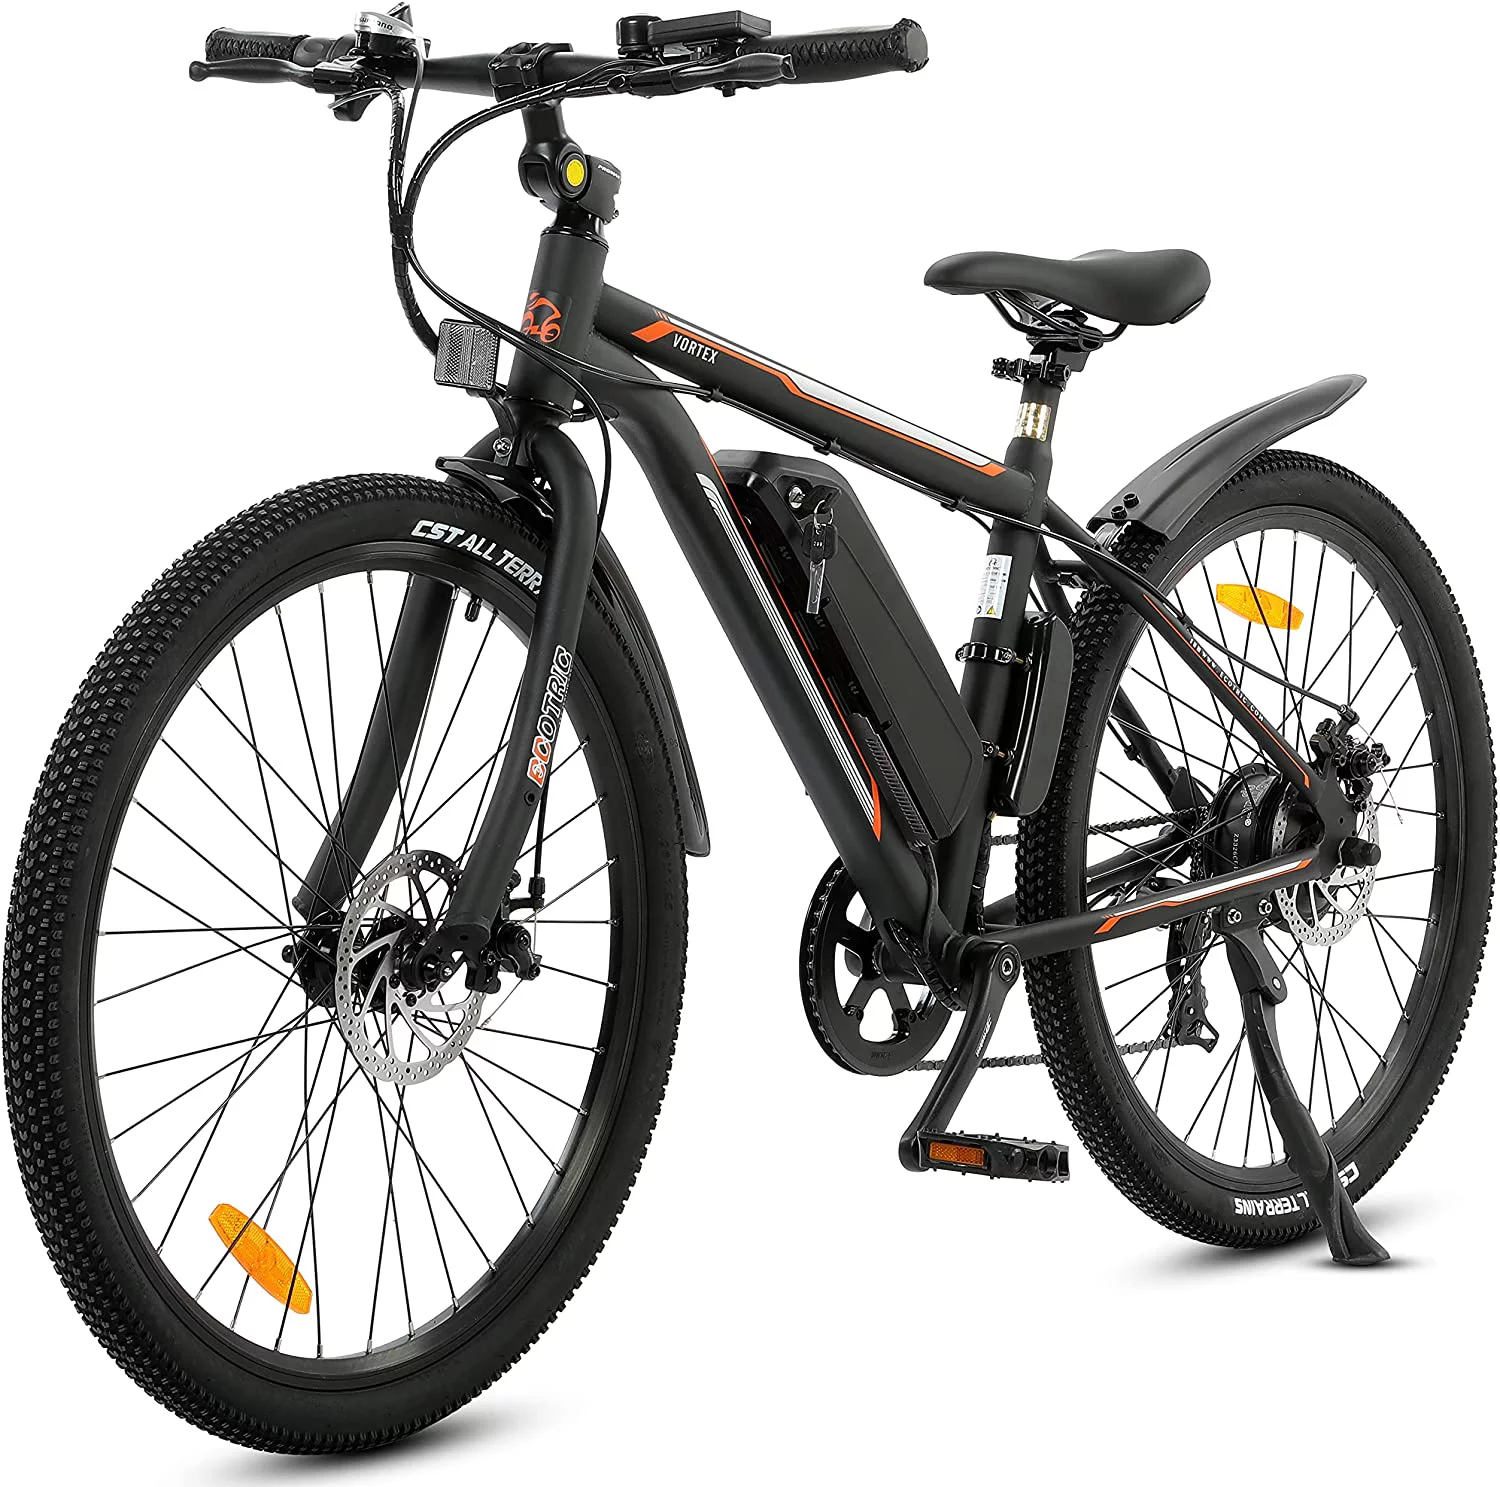 Ecotric Black 26 In. 36V 350W Electric City Bicycle e-Bike Removable Battery 7 Speed Pedal Assist - Walmart.com $564.50